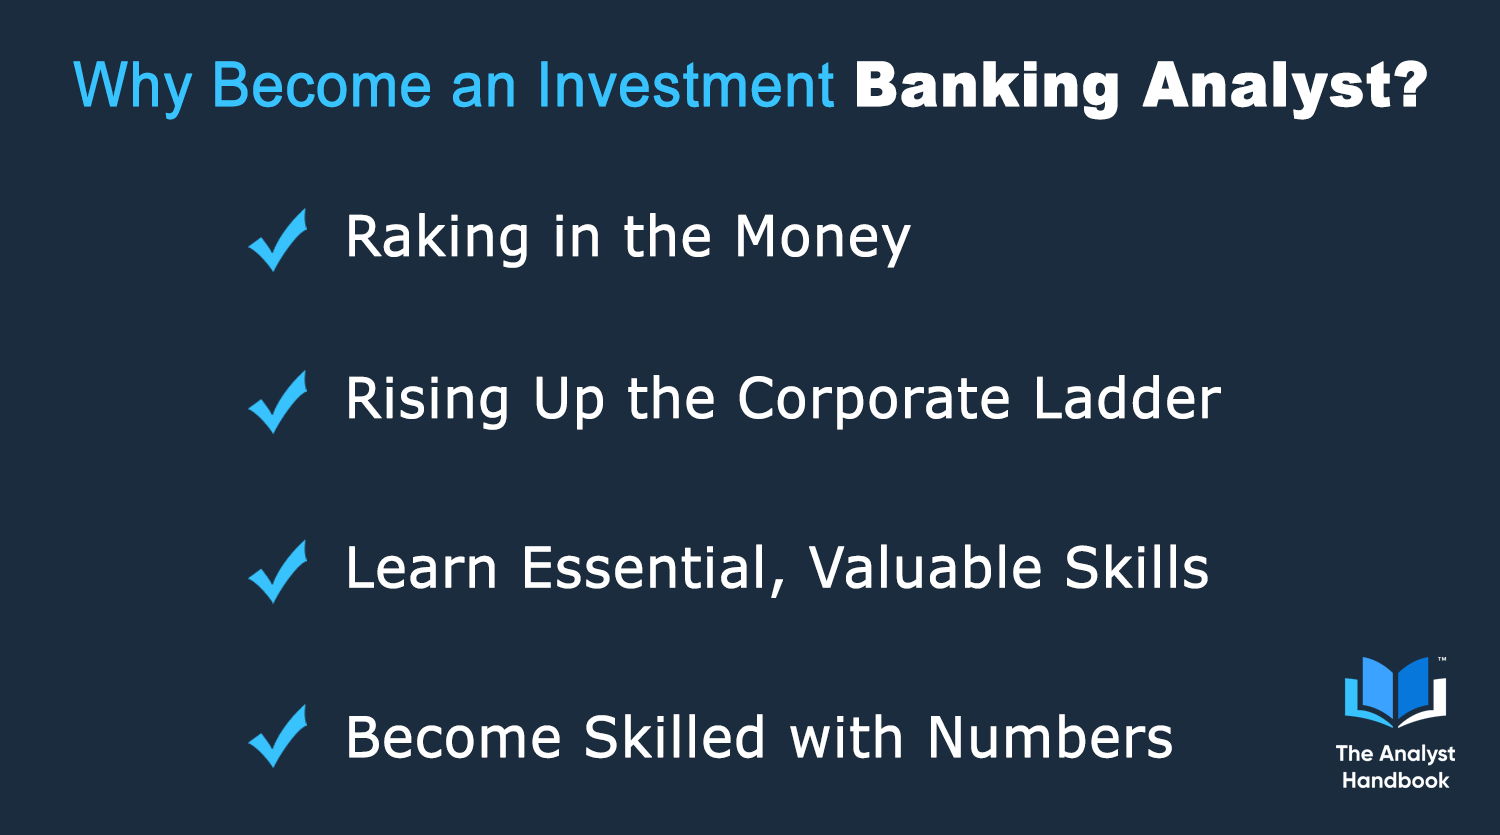 Why become an investment banking analyst?